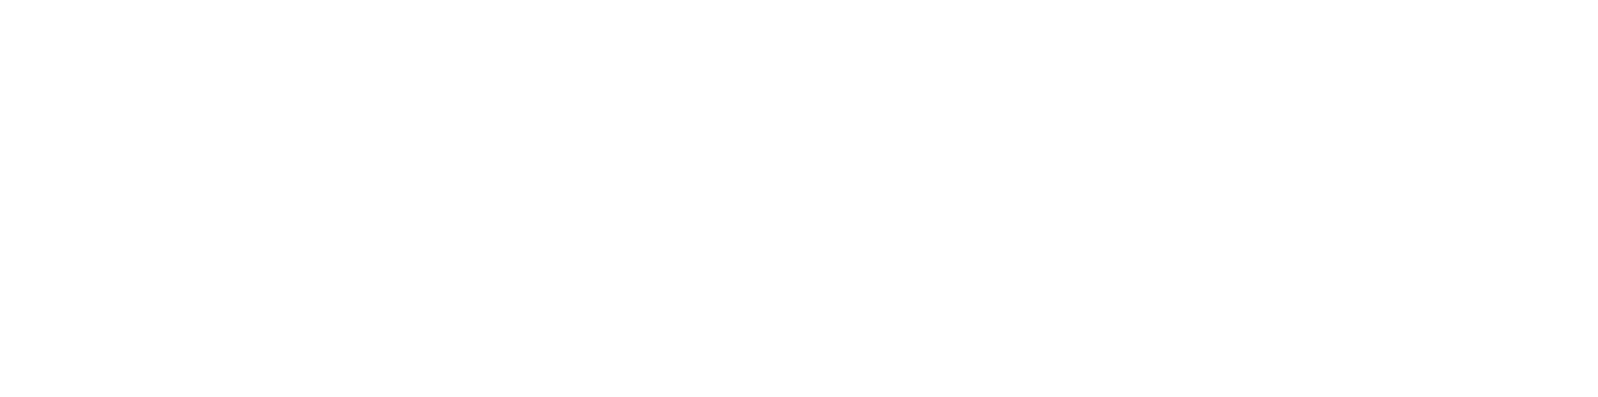 Injection Molding | Injection Moulding Factory - VulcanMold